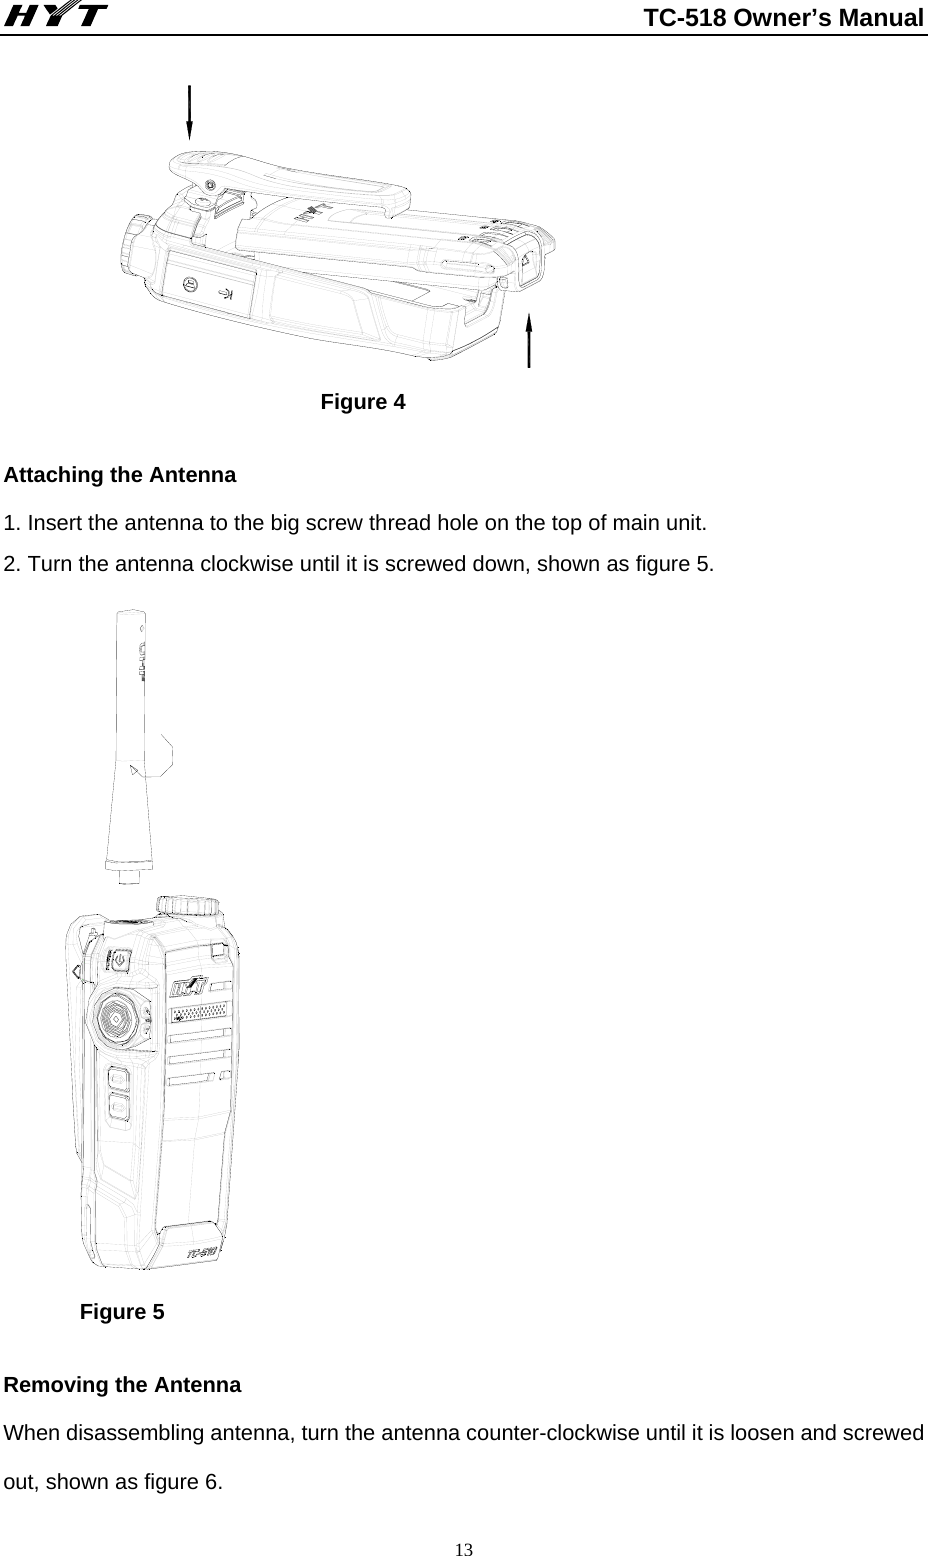                                                          TC-518 Owner’s Manual  13                                                          Figure 4                           Attaching the Antenna 1. Insert the antenna to the big screw thread hole on the top of main unit.     2. Turn the antenna clockwise until it is screwed down, shown as figure 5.                       Figure 5                                                    Removing the Antenna   When disassembling antenna, turn the antenna counter-clockwise until it is loosen and screwed out, shown as figure 6. 